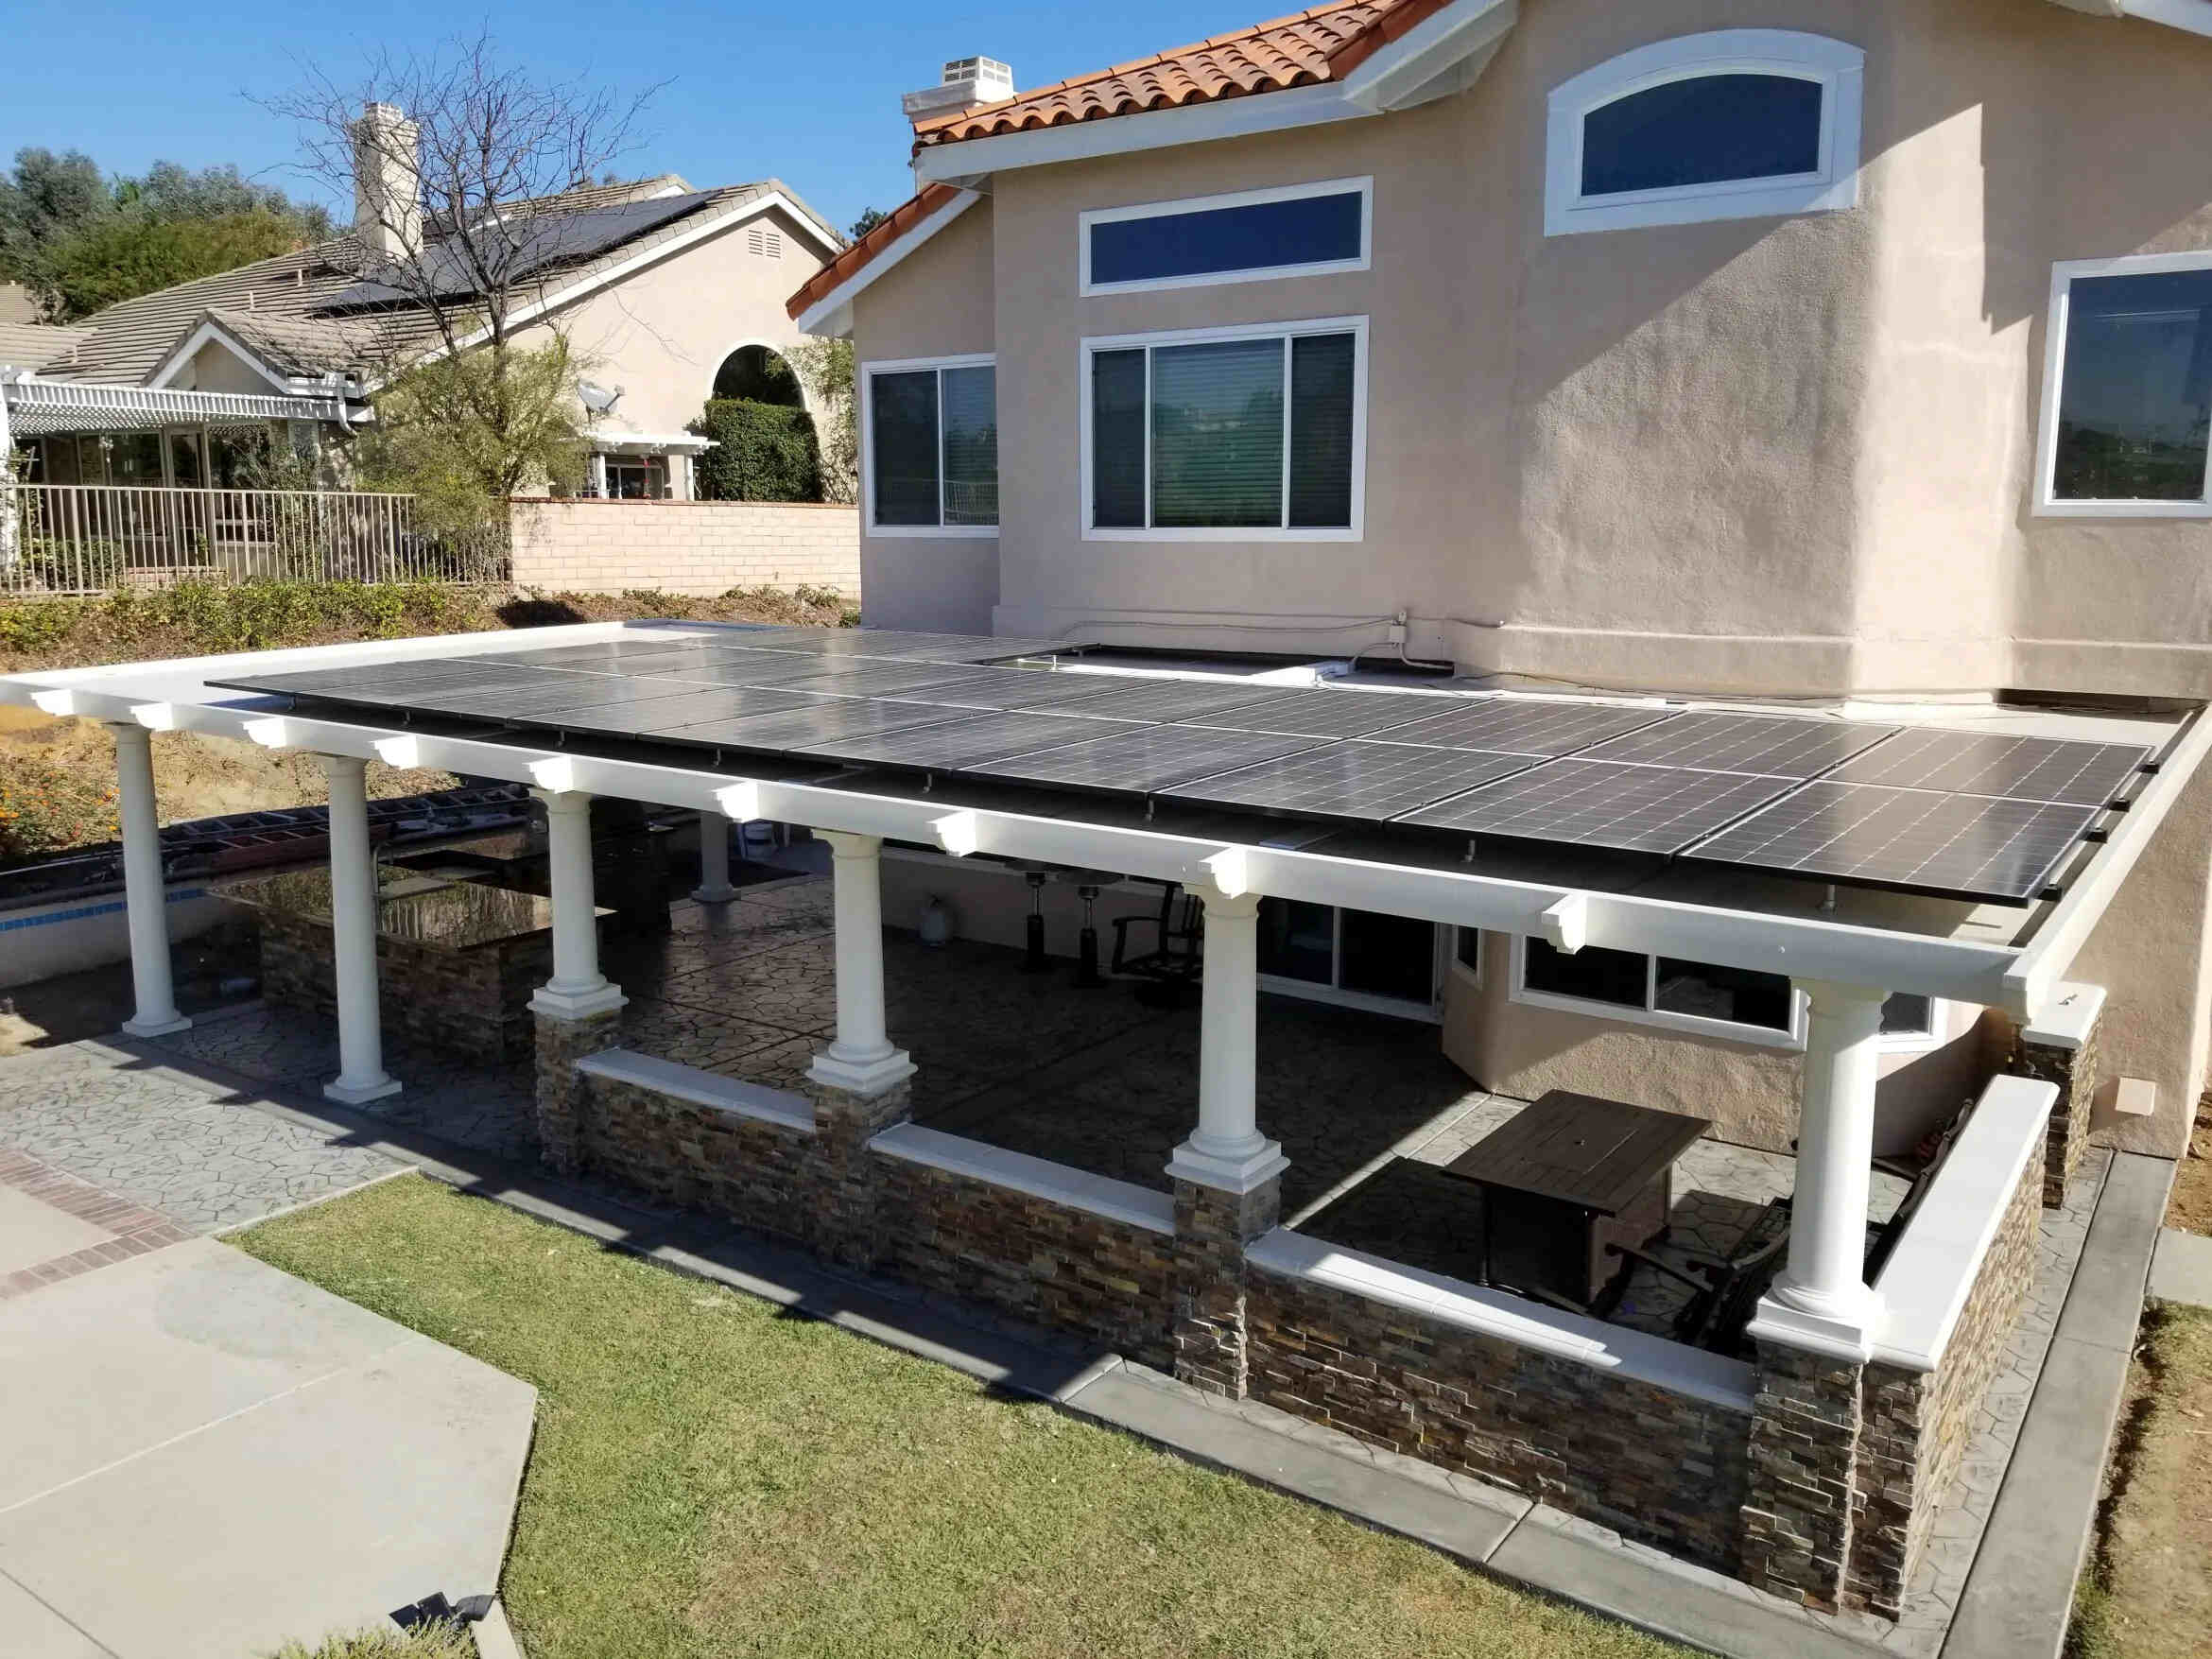 How To Build A Solar Panel Patio Cover